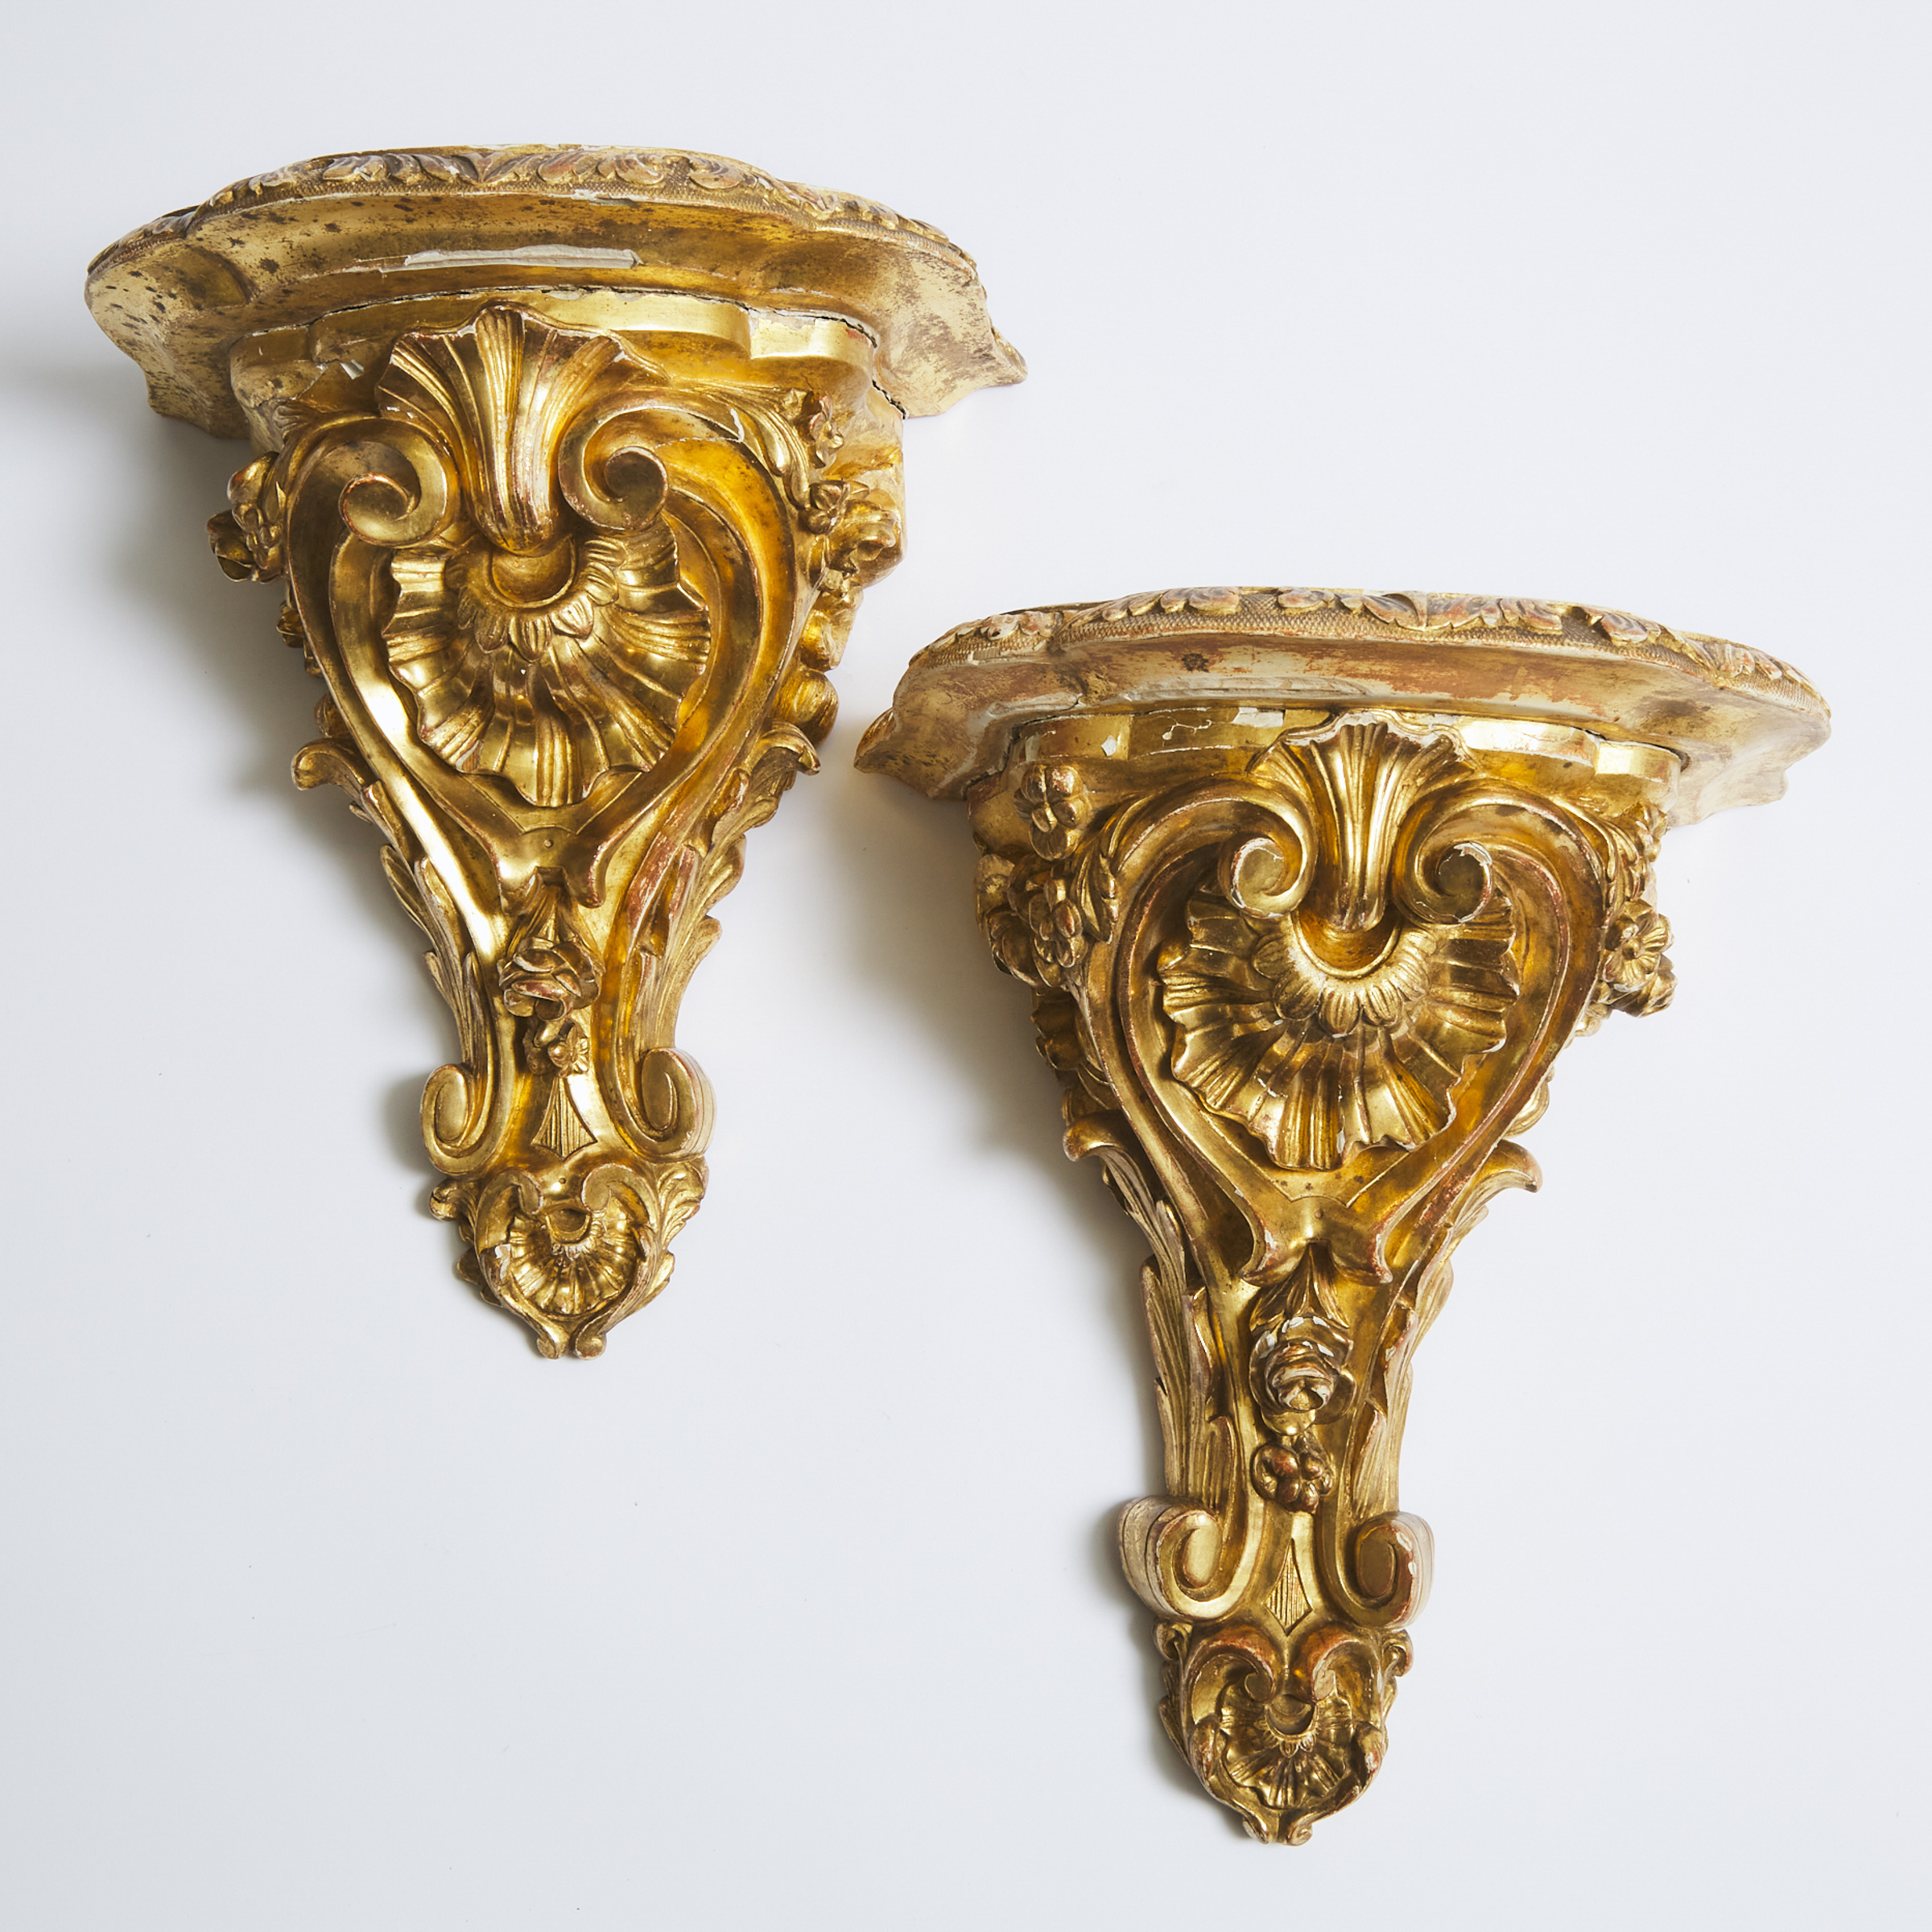 Pair of Florentine Baroque Giltwood Wall Brackets, 19th/early 20th century